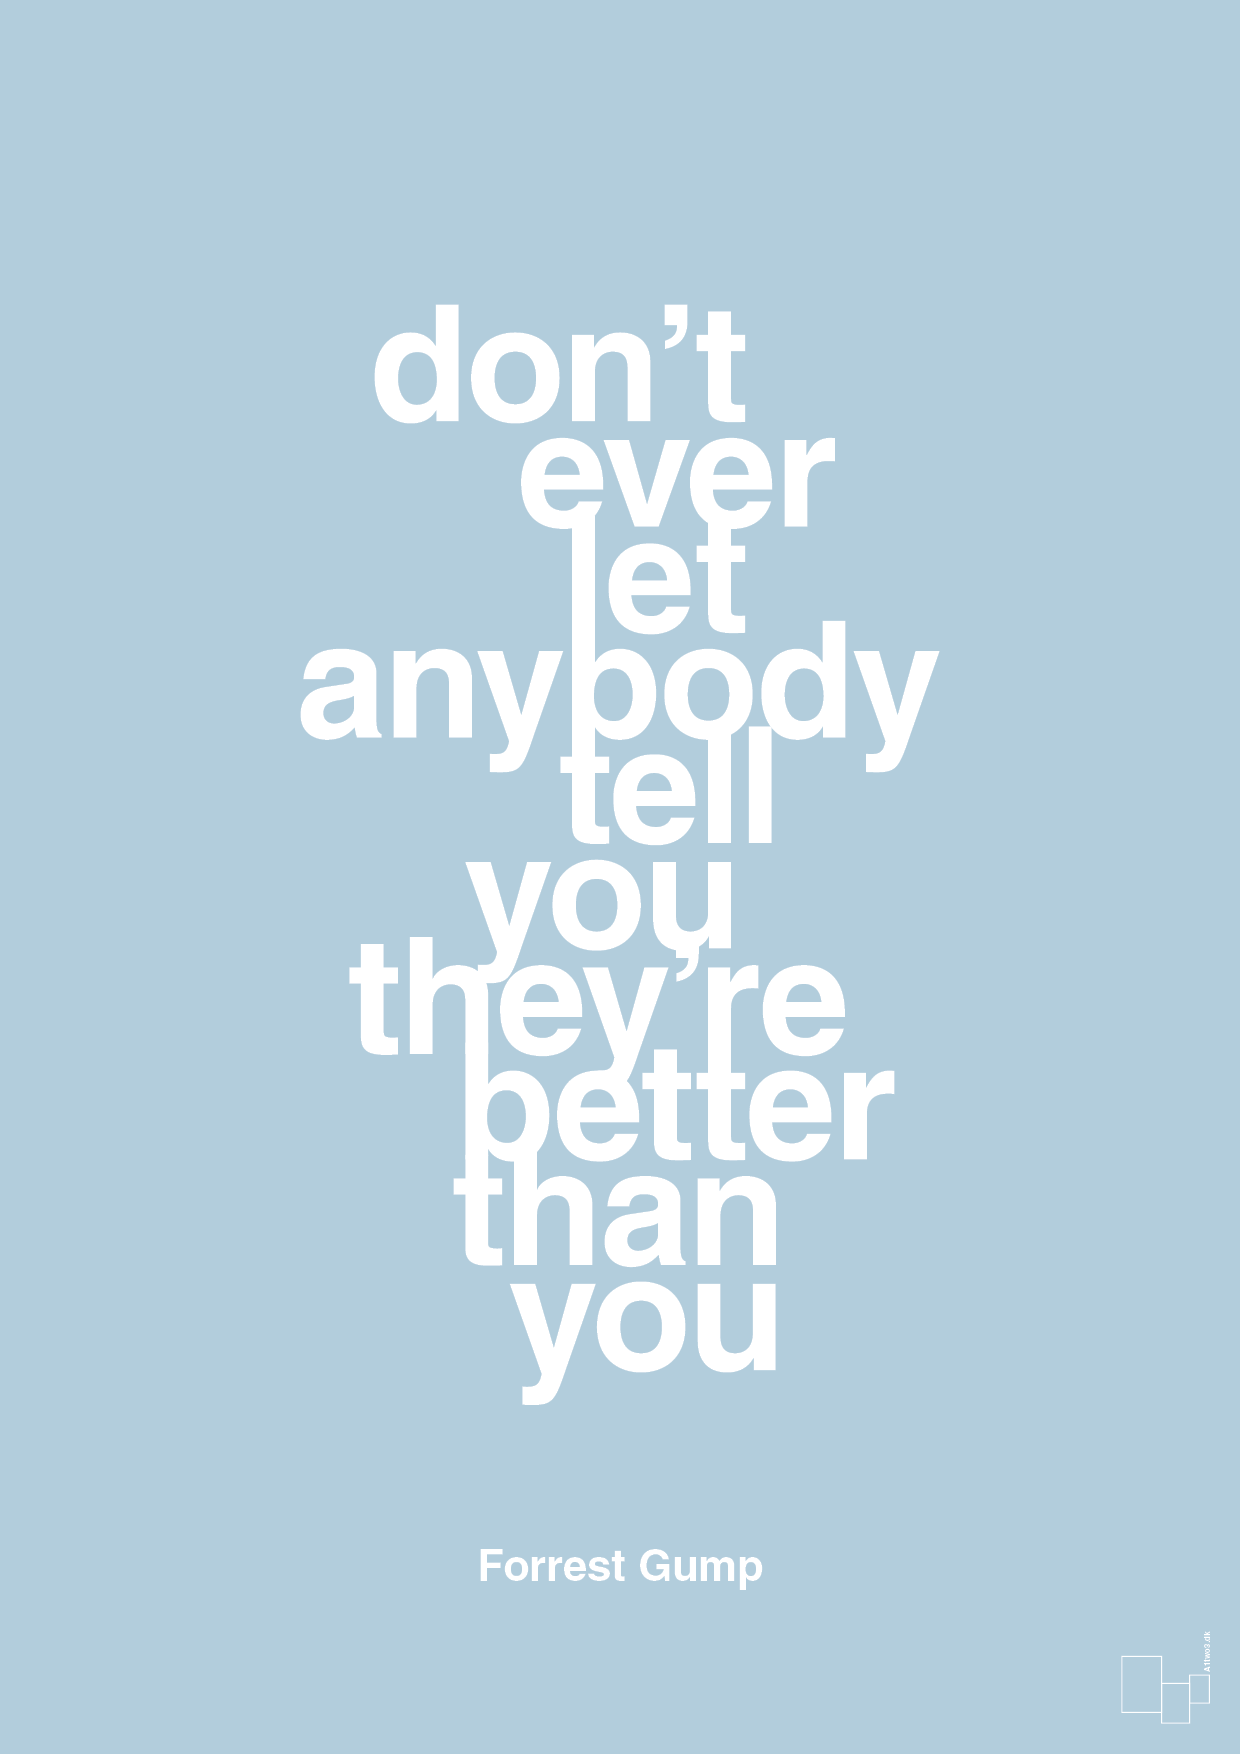 don’t ever let anybody tell you they’re better than you - Plakat med Citater i Heavenly Blue